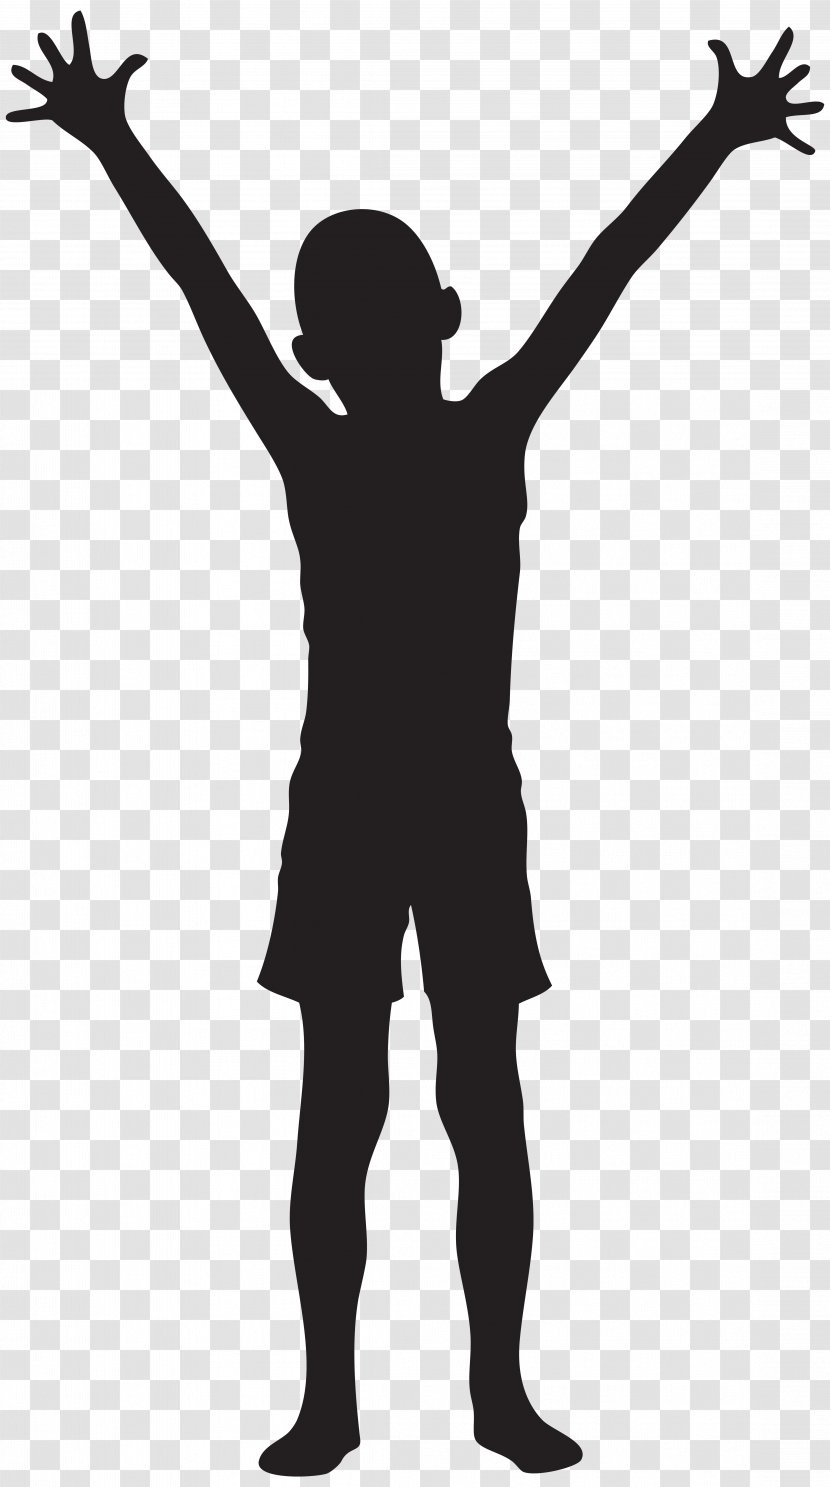 Silhouette Clip Art - Standing - Silhouete Transparent PNG